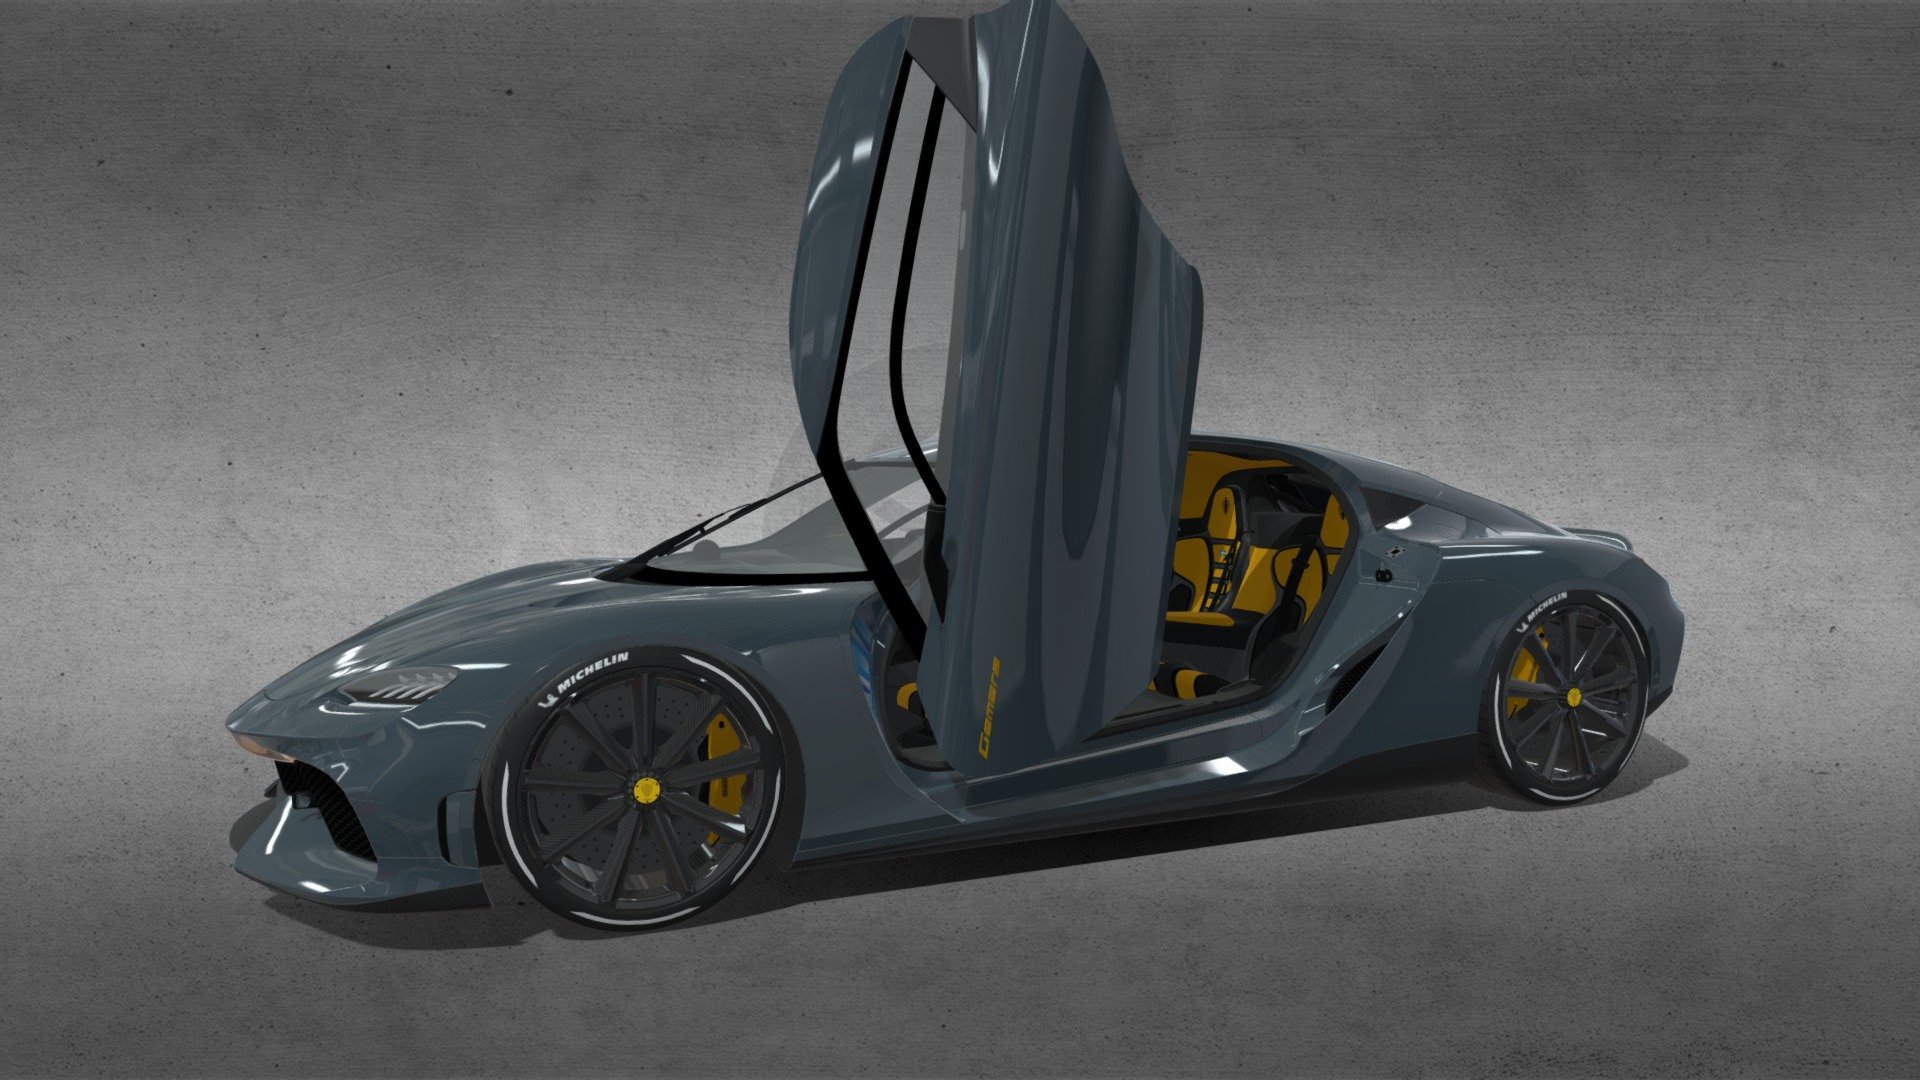 The Koenigsegg Gemera is the first four-seater car built by Koenigsegg and the first to be powered by a compact engine weighing only 70 kg (150 lb). The engine is so small because it is a camless piston engine,1988.25cc and has two turbos and three cylinders driving the front wheels and charging the batteries. It is rated at 590 hp (440 kW) at 7500 rpm, with a redline at 8500 rpm, and 600 N⋅m (443 lb⋅ft) of torque from 2000 rpm to 7000 rpm. There are also three electric motors, one for each rear wheel with 500 bhp and 1000 Nm each and one on the crankshaft with 400 bhp and 500 Nm to power the front wheels; these combine to give 1,100 horsepower (820 kW) of electric power; together with the engine this gives a combined peak output of 1,268 kW (1,700 hp; 1,724 PS) and 3,500 N⋅m (2,581 lb⋅ft) of torque (maximum torque 11,000 N⋅m (8,113 lb⋅ft) at 4000 rpm)  All done in Blender 2.93 and photoshop for the textures - KOENIGSEGG GEMERA - 3D model by All-Wide (@dsm350) 3d model